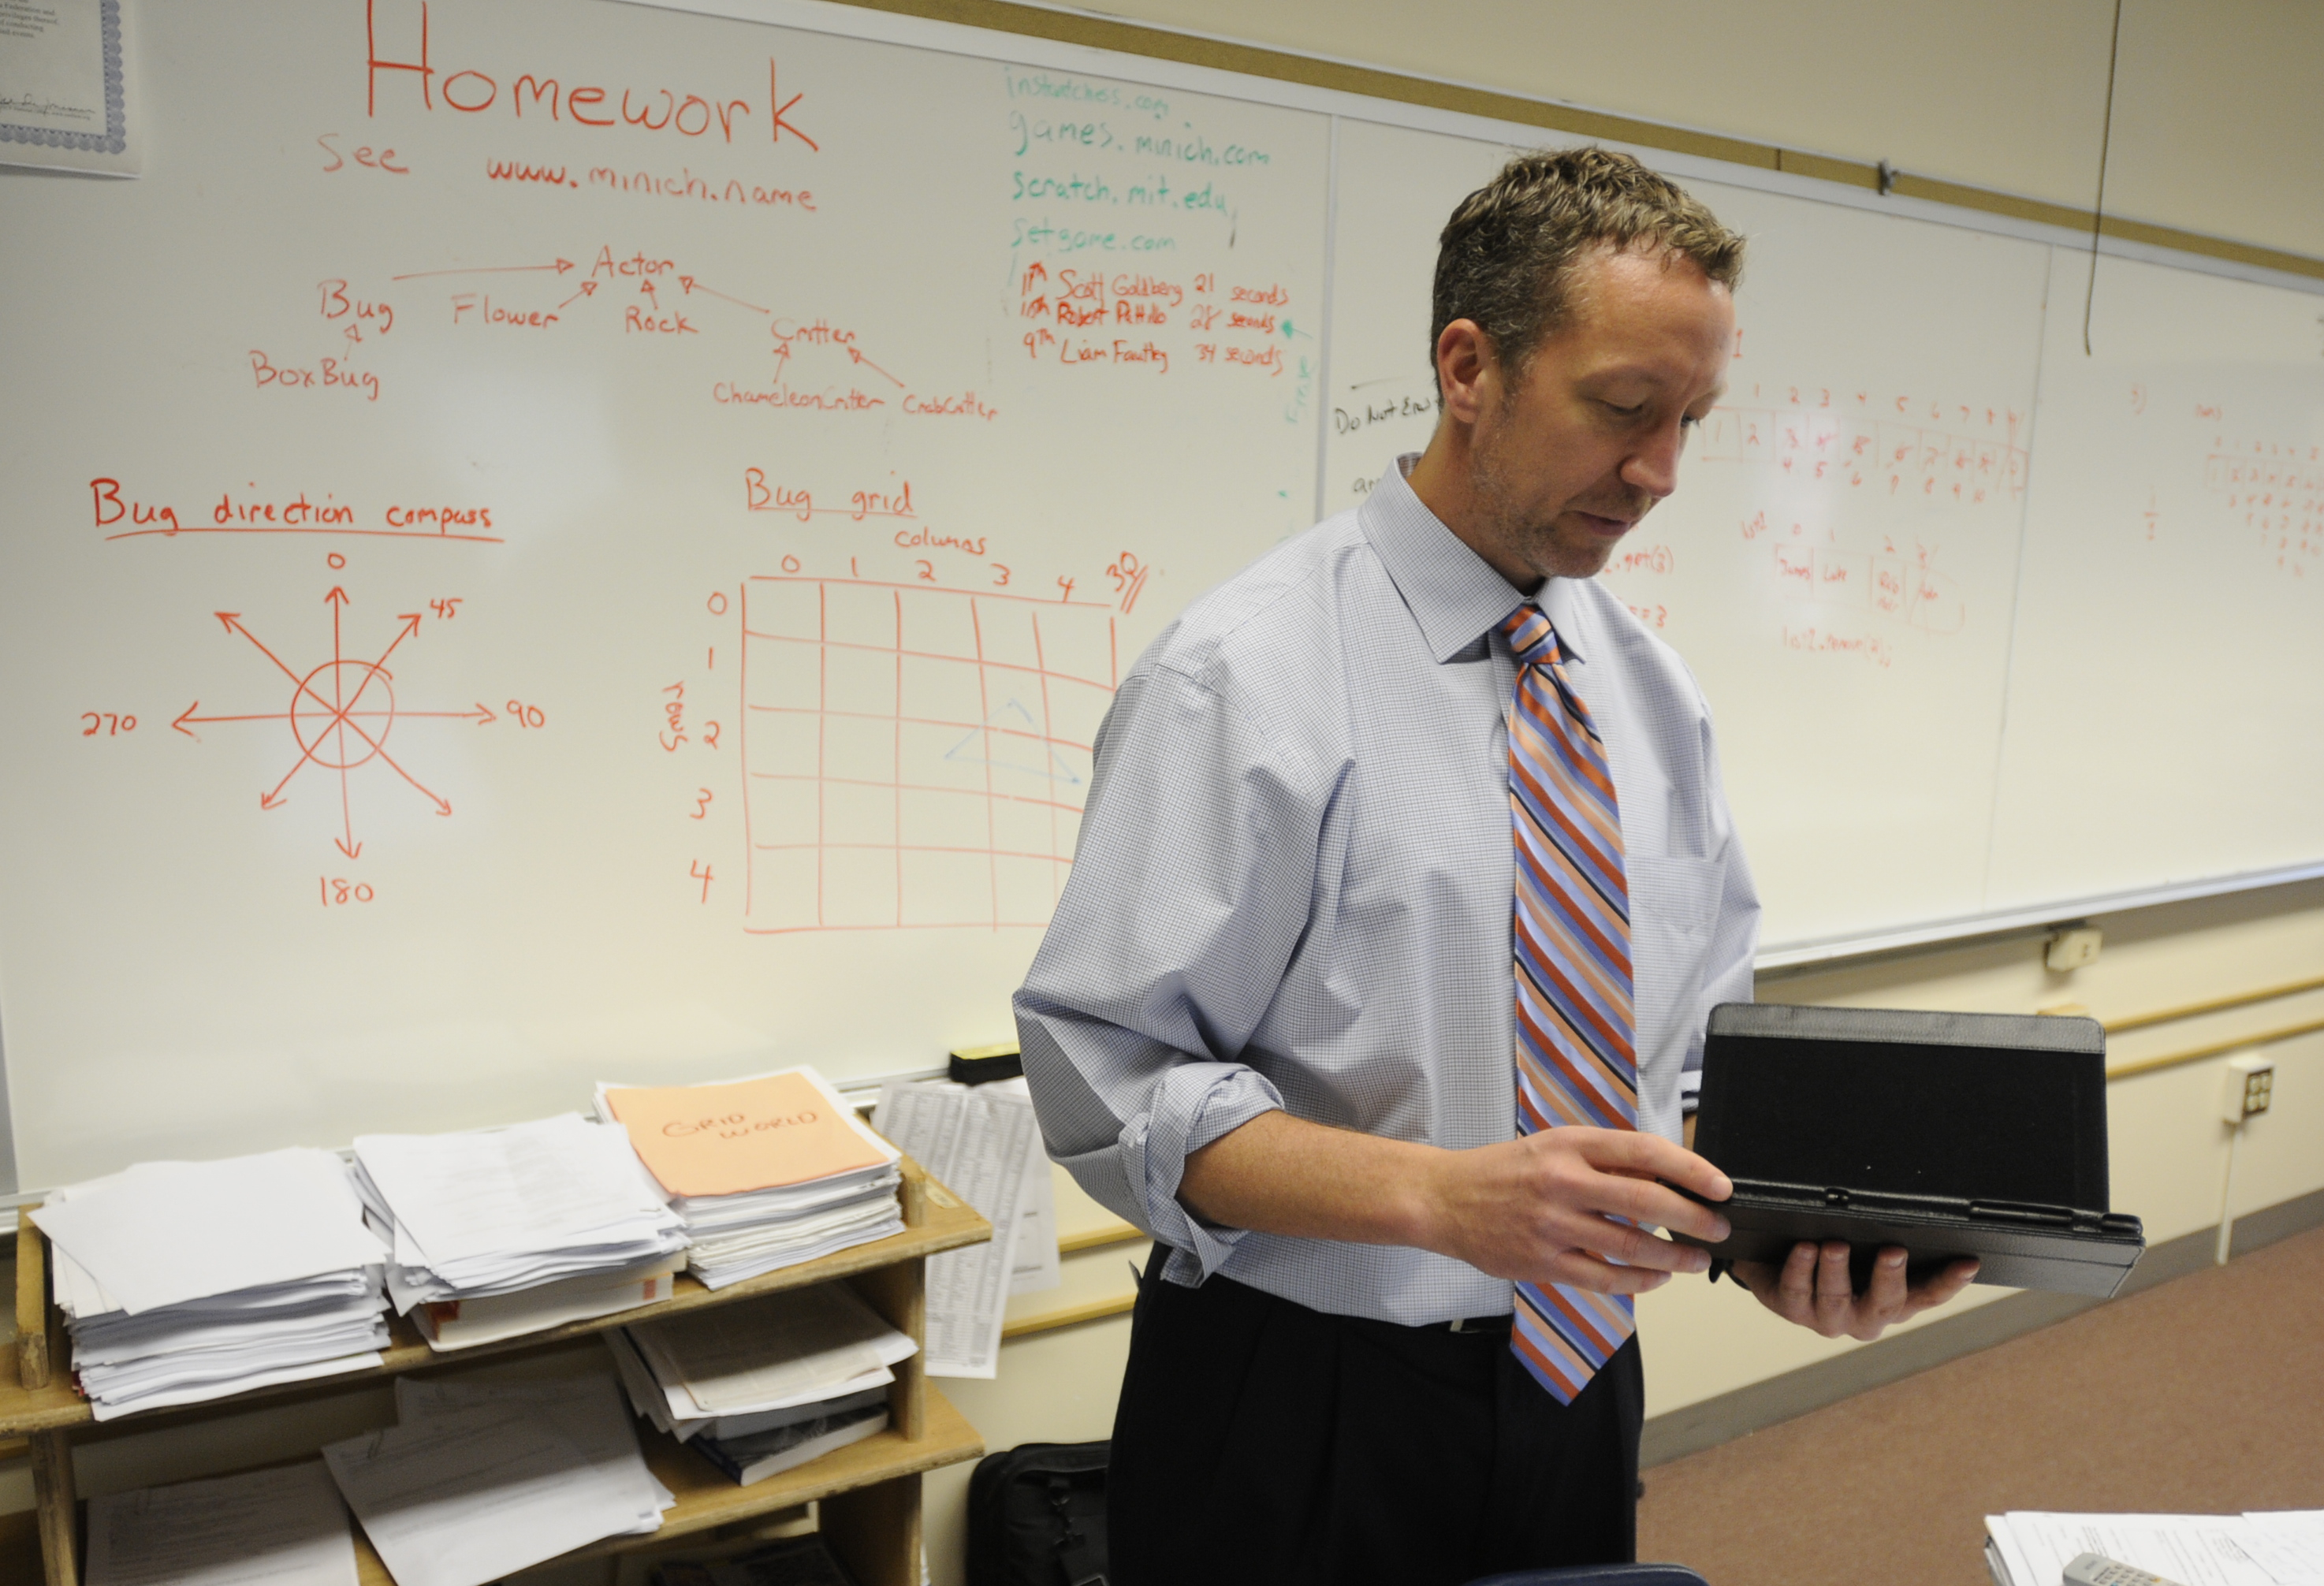 Teacher Curt Minich uses an Android tablet to check the students apps during the grading process.Wyomissing High School has had computer science courses for a number of years, but with changing technologies, students are learning new programming incl